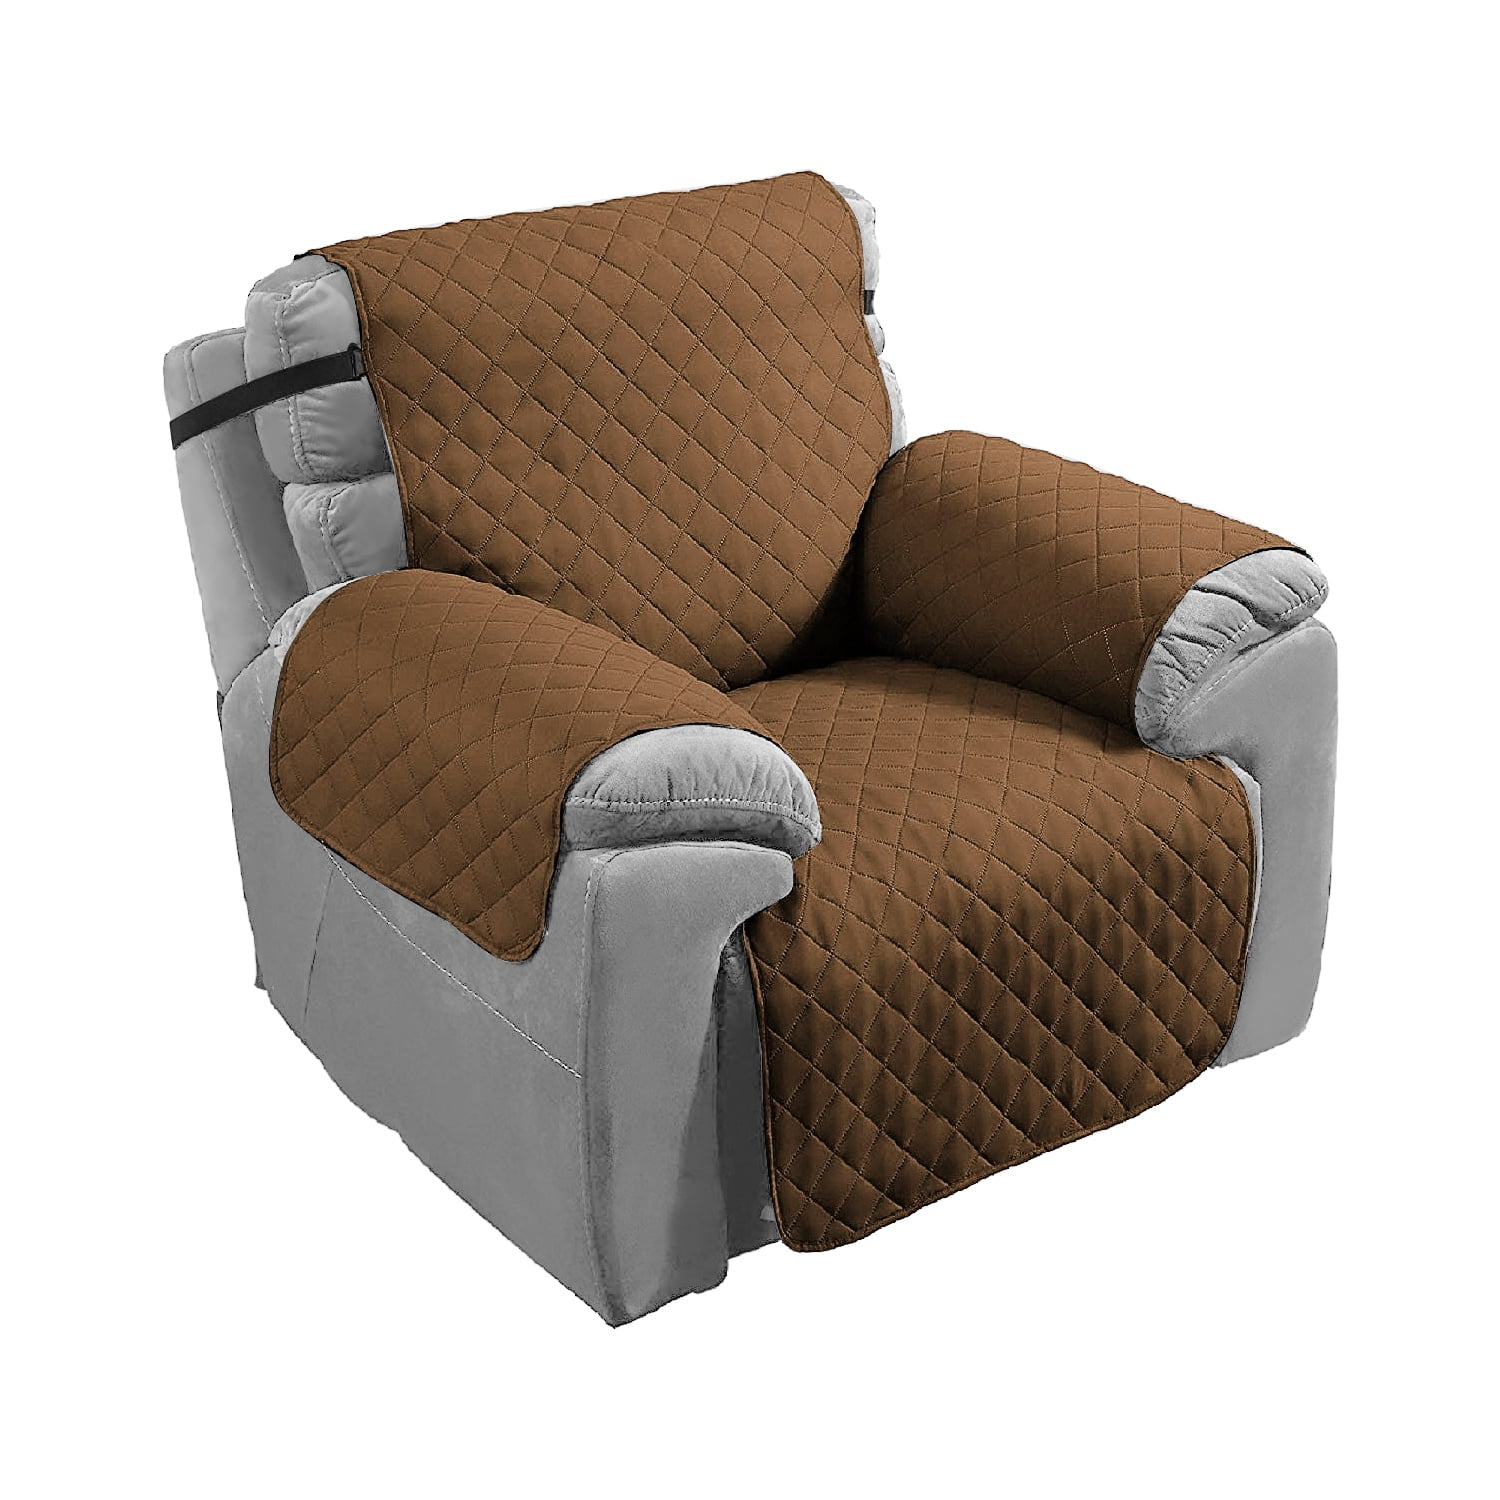 Kids Teens Furniture 1 Seater Leather, Toddler Brown Leather Chair